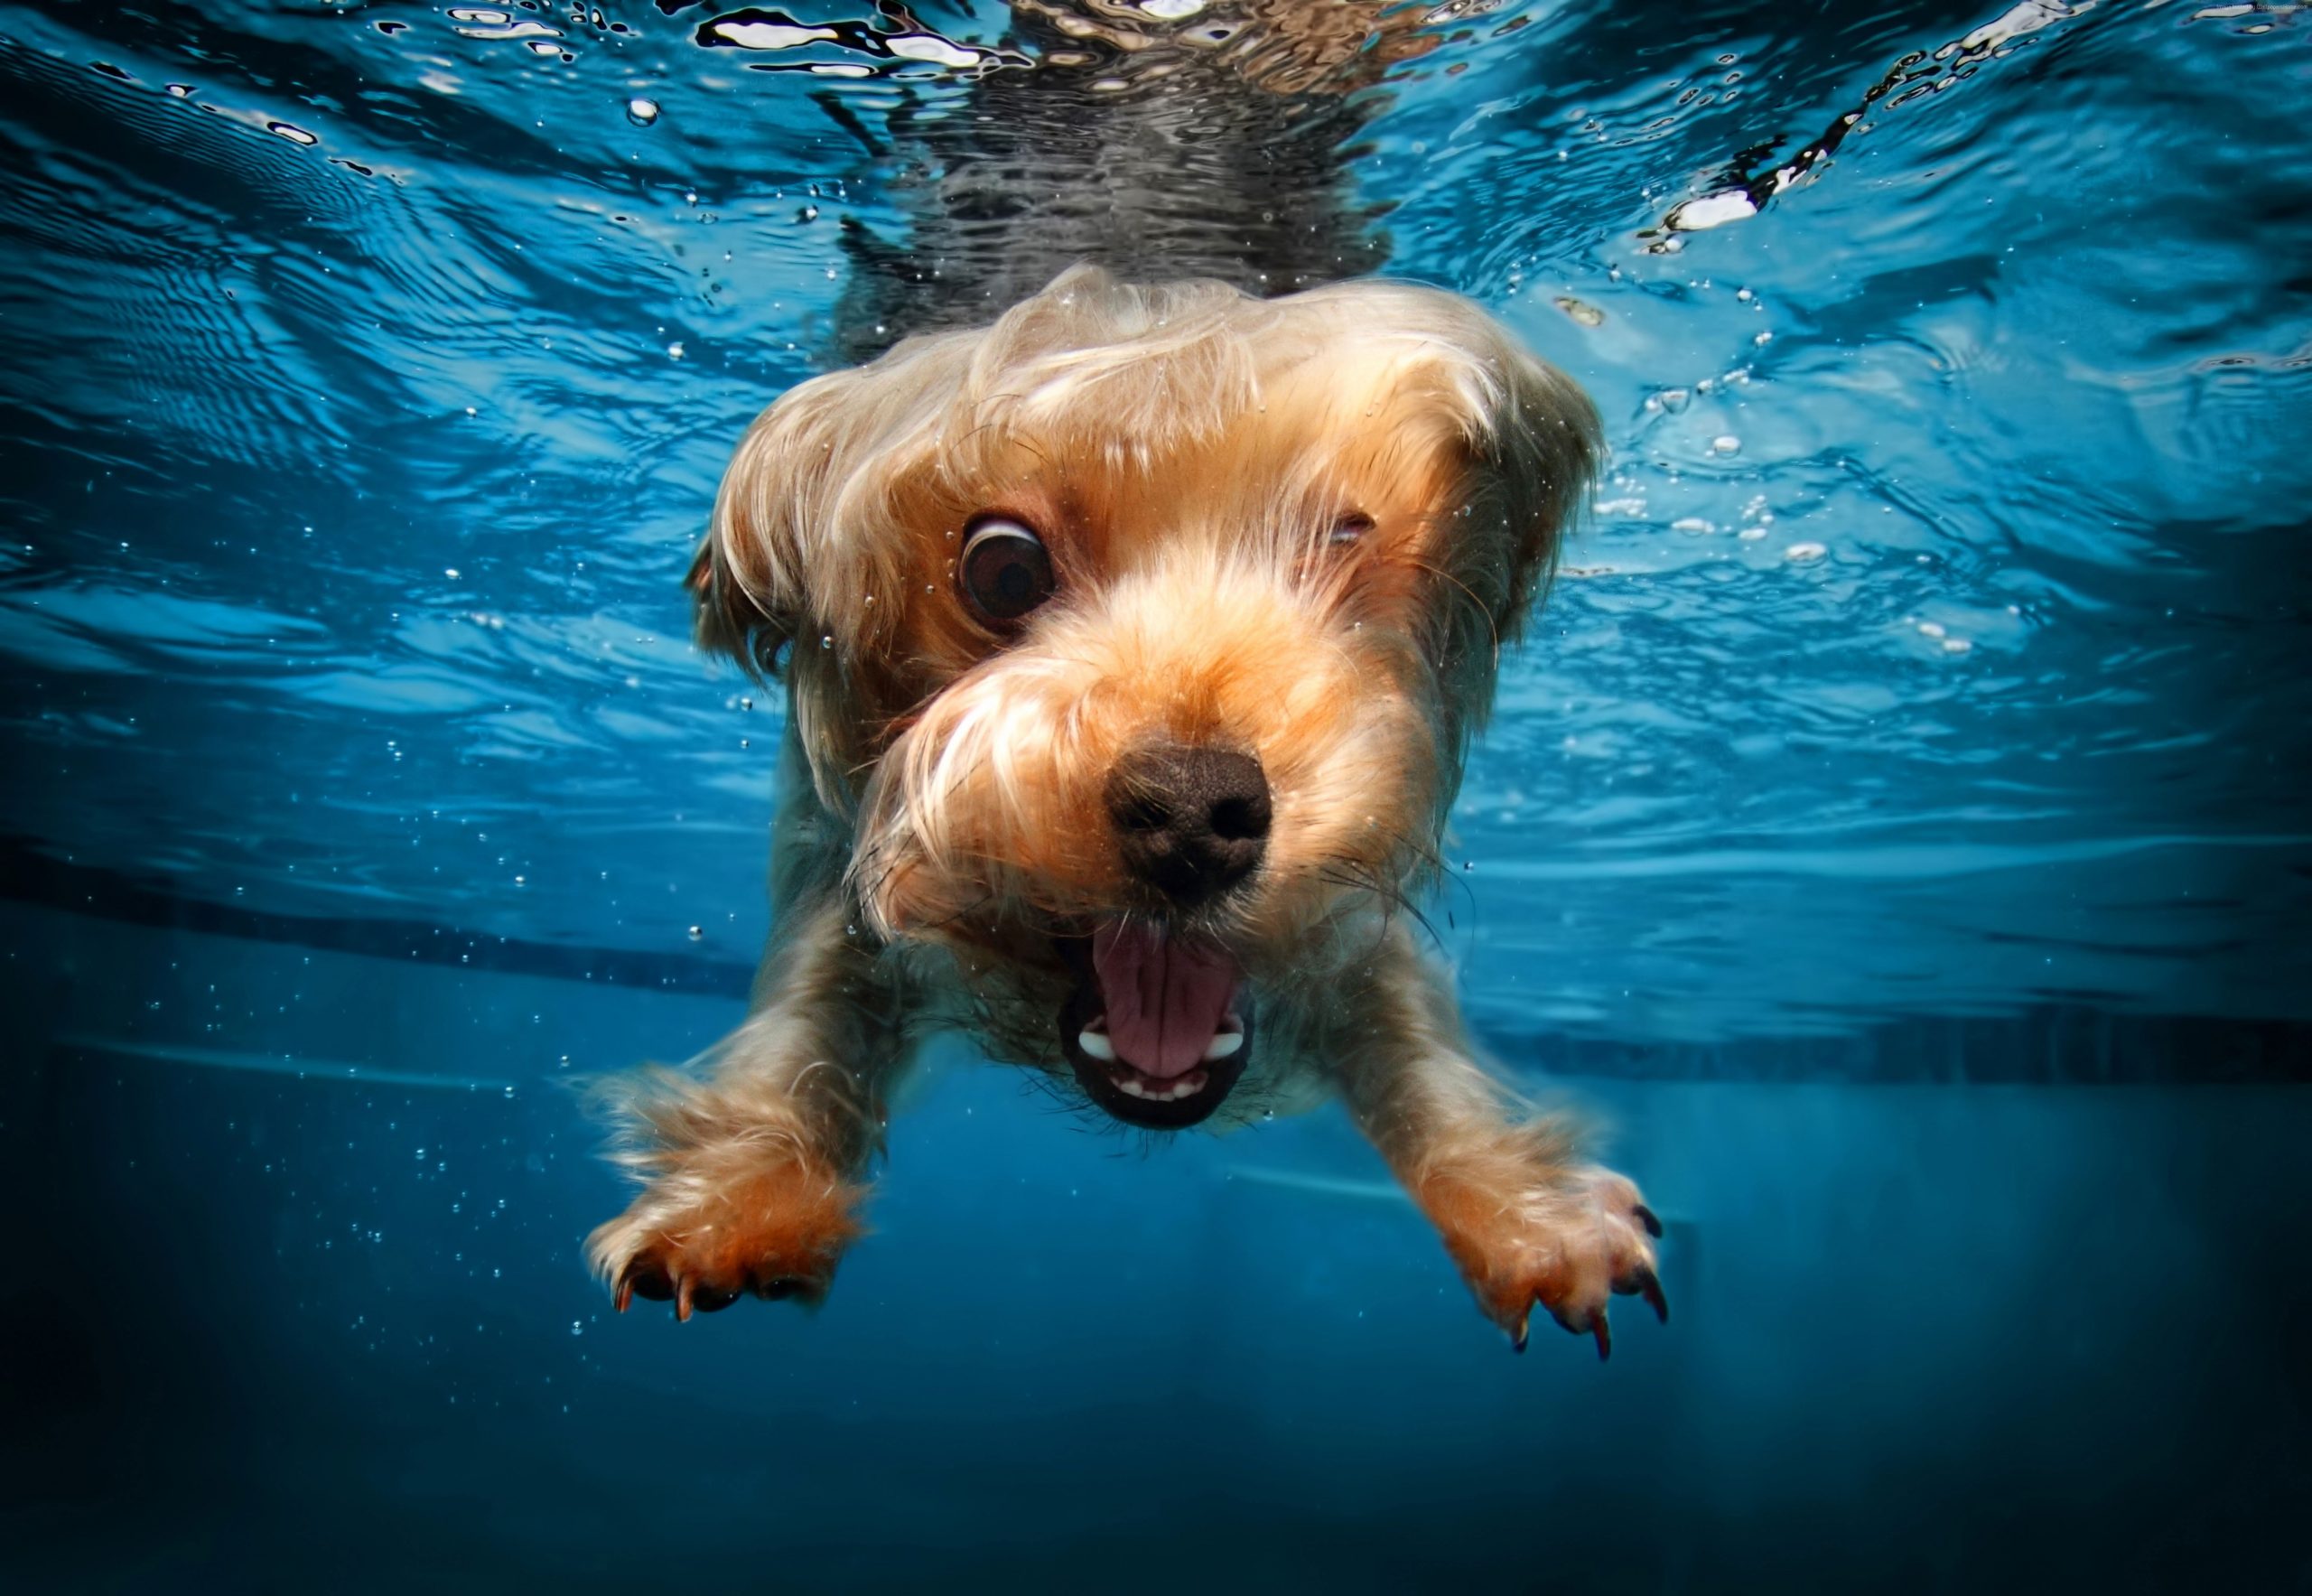 Cute Animals Wallpaper, Terrier, Funny, Dog, Underwater, Canine, One Animal  - Wallpaperforu